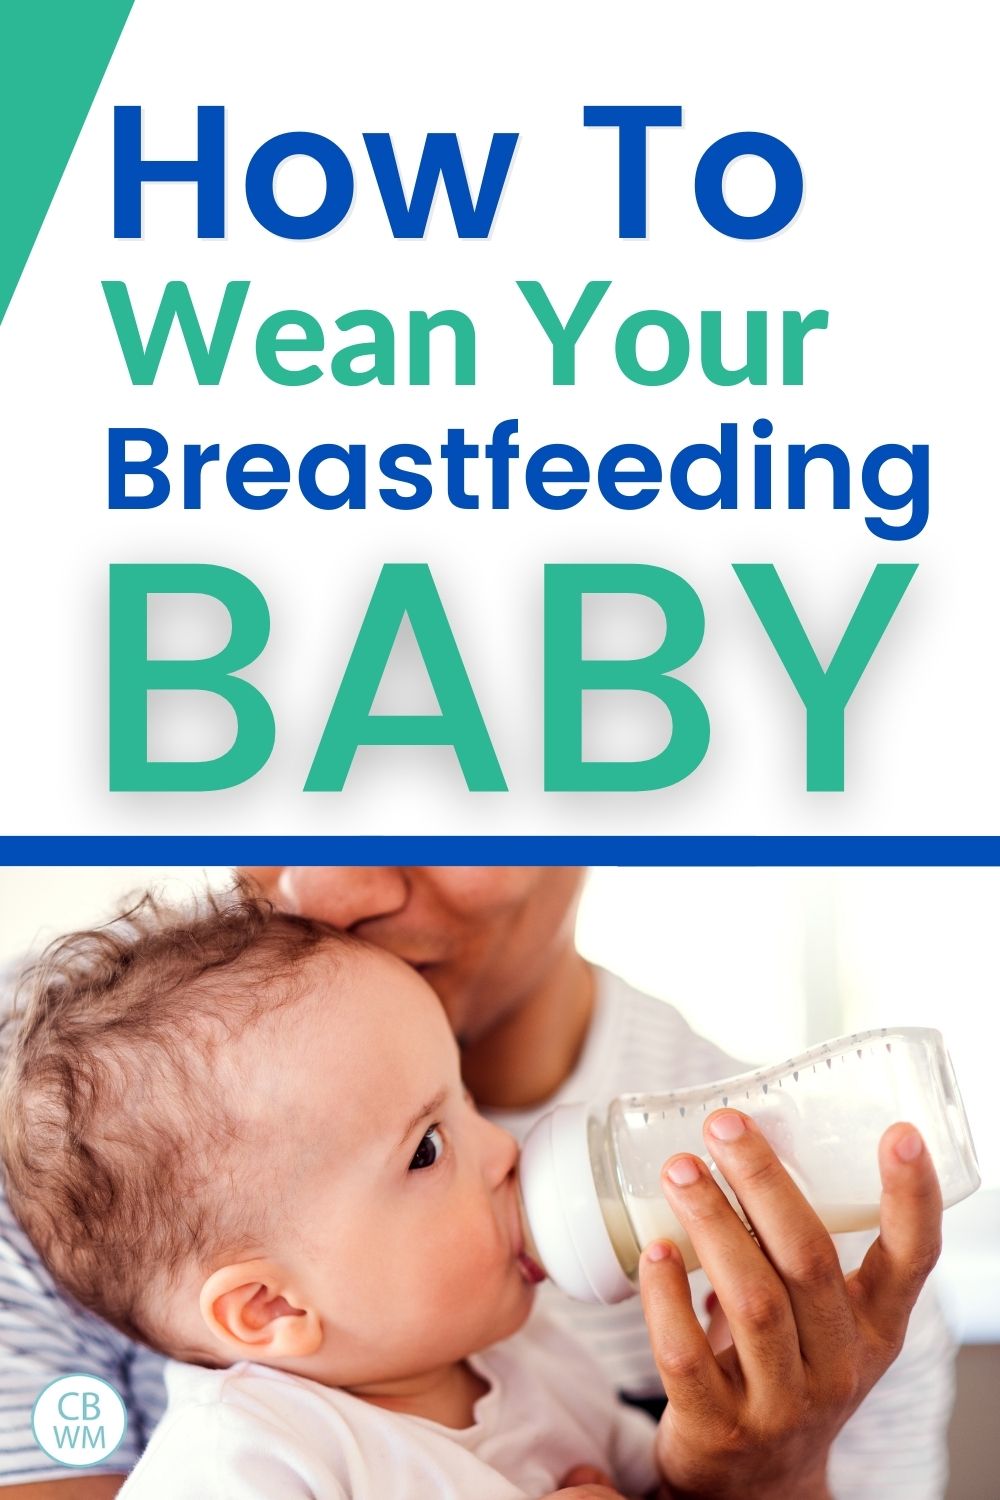 Weaning a baby